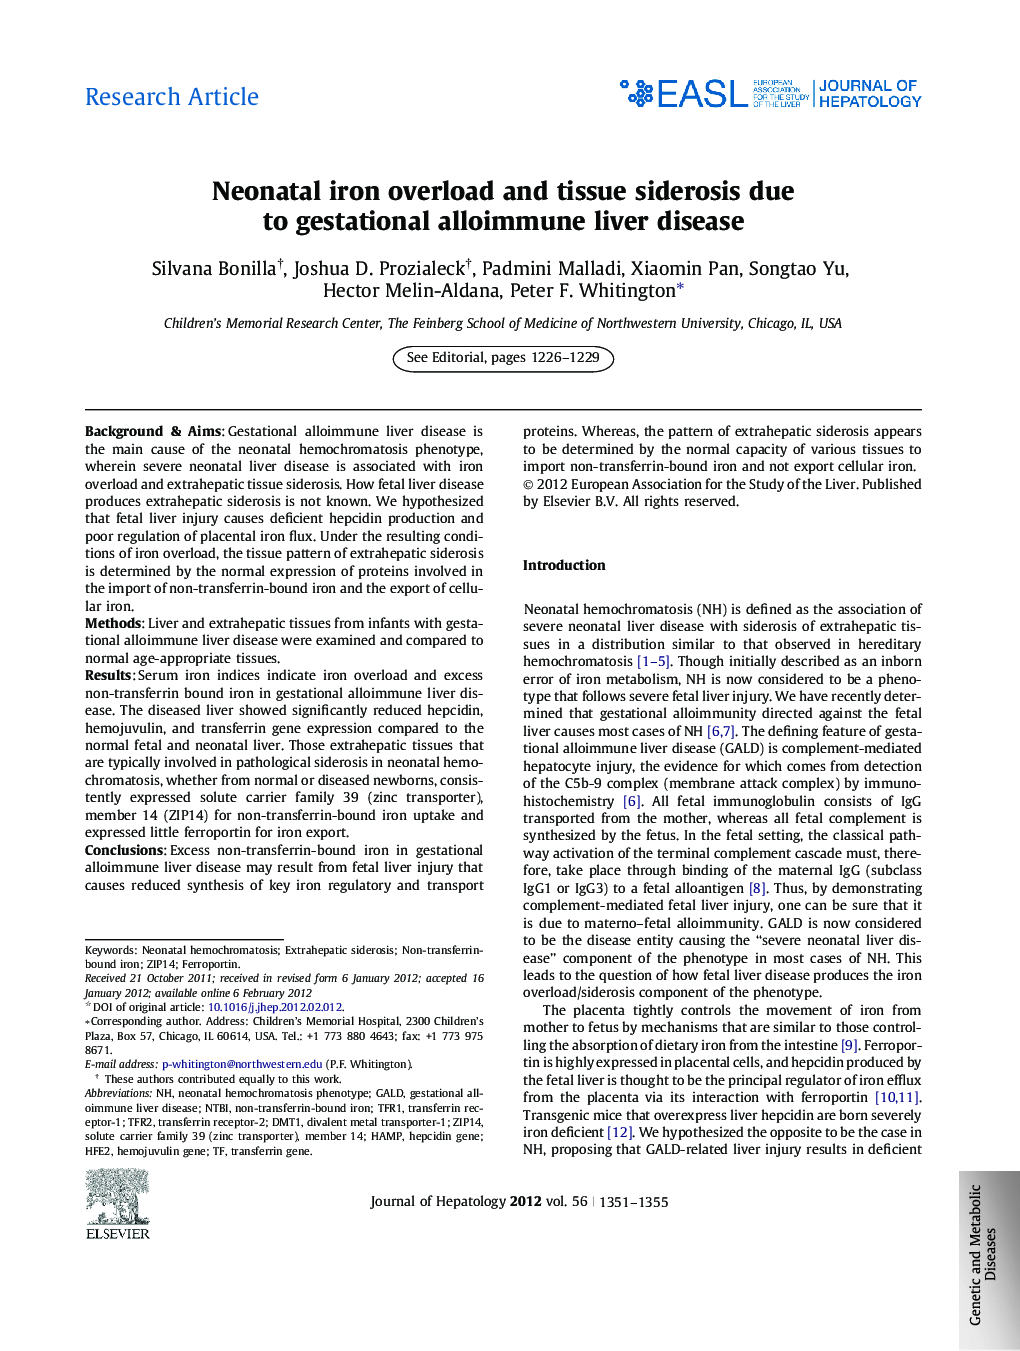 Research ArticleNeonatal iron overload and tissue siderosis due to gestational alloimmune liver disease